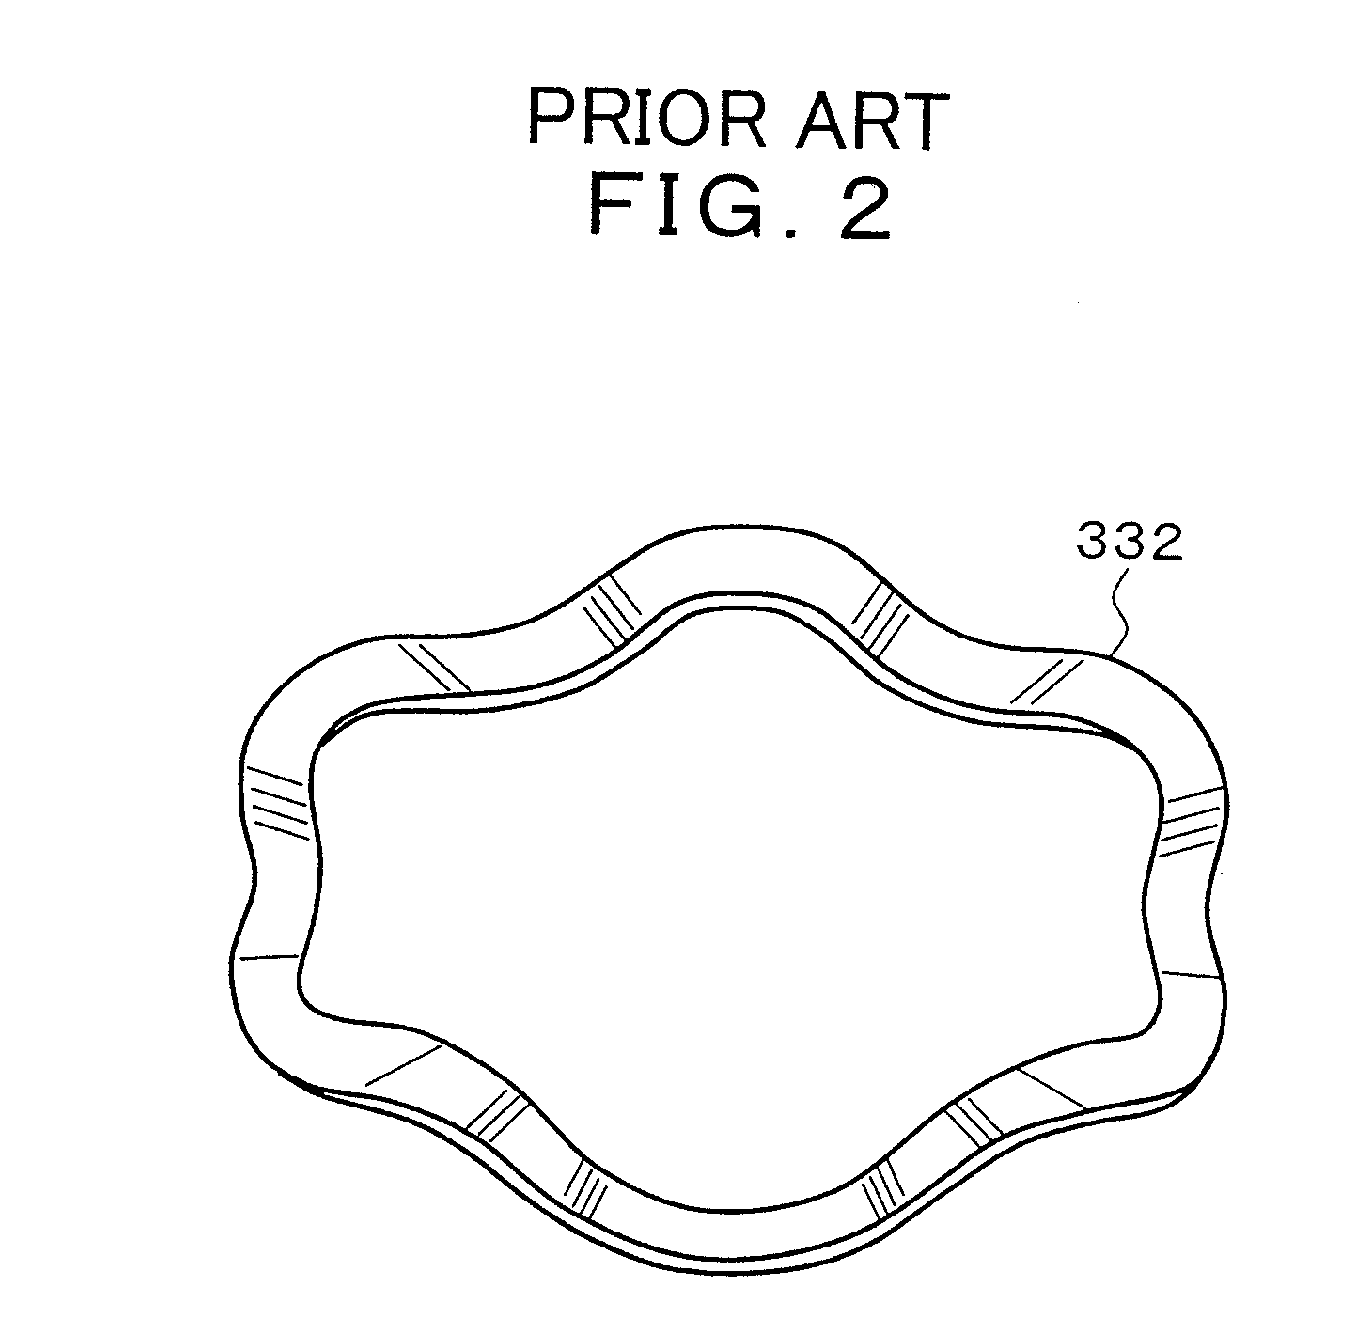 Driving force transmitting device for four-wheel drive vehicle